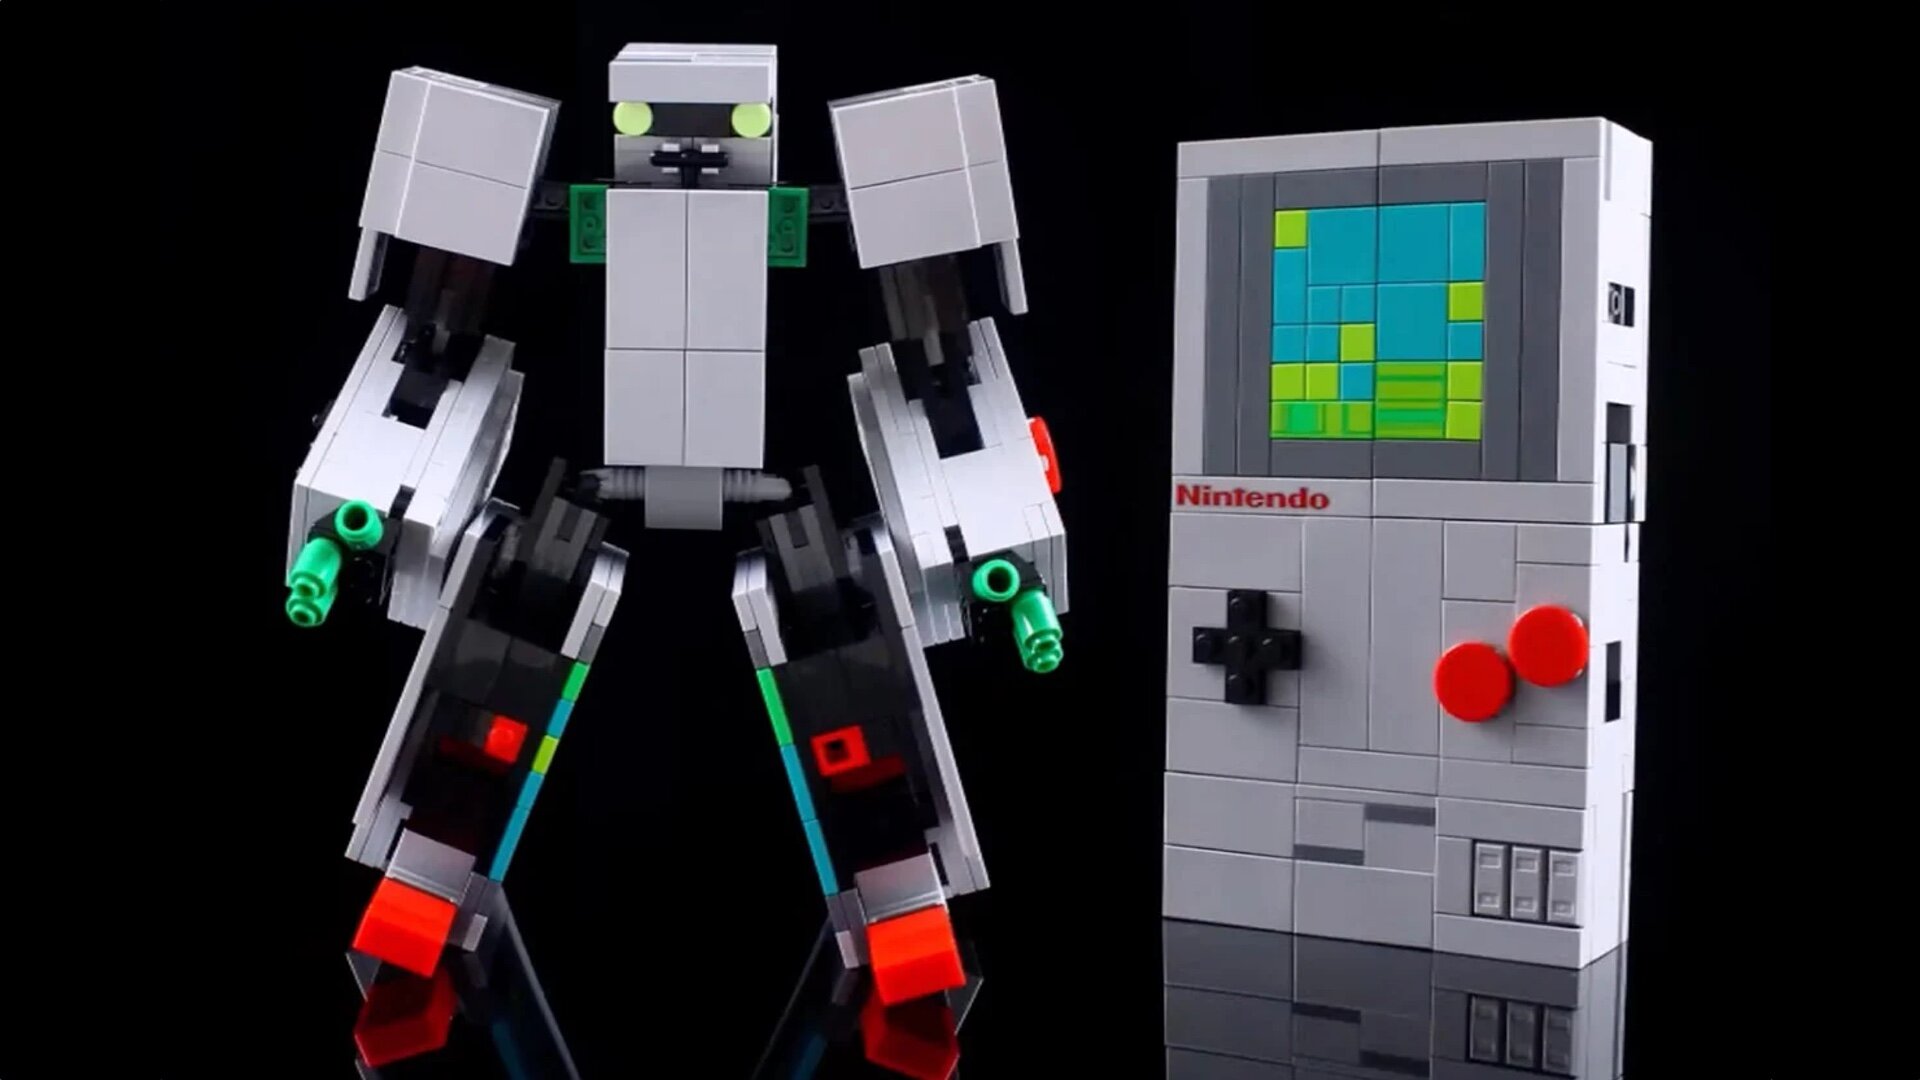 LEGO Builder Turns The NES Kit Into a Game Boy That Transforms Into a Robot  — GeekTyrant